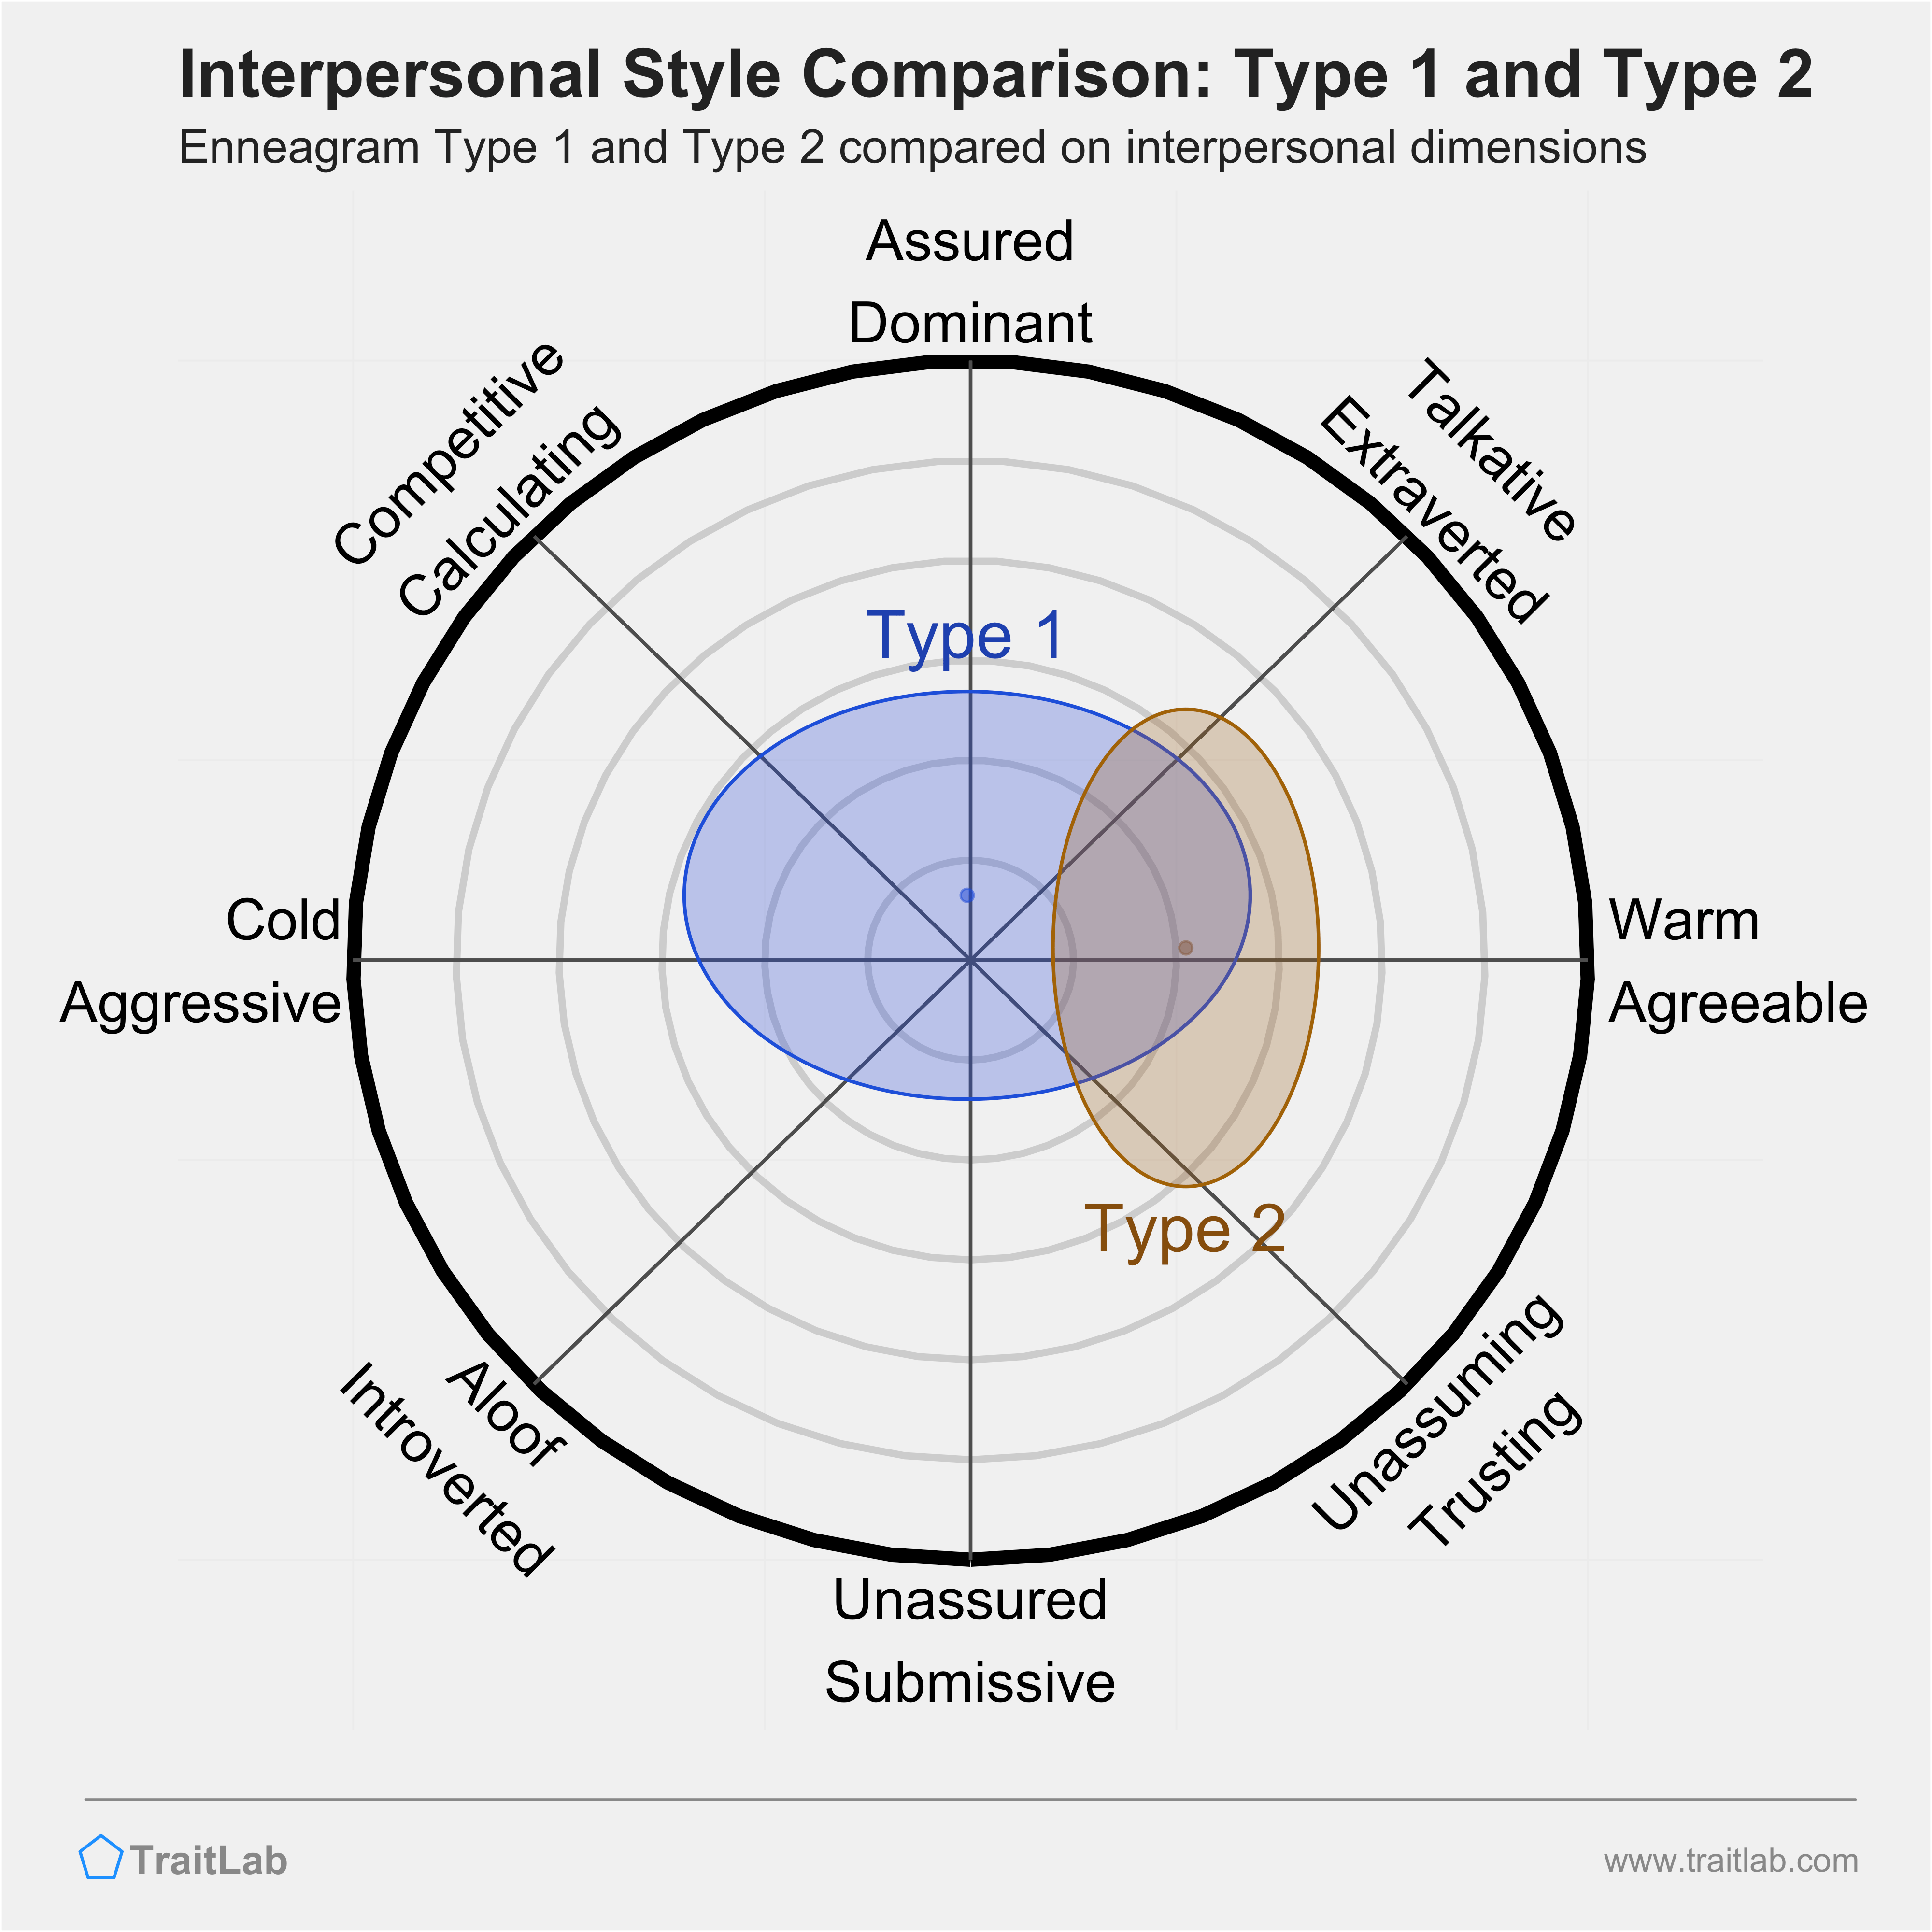 Enneagram Type 1 and Type 2 comparison across interpersonal dimensions